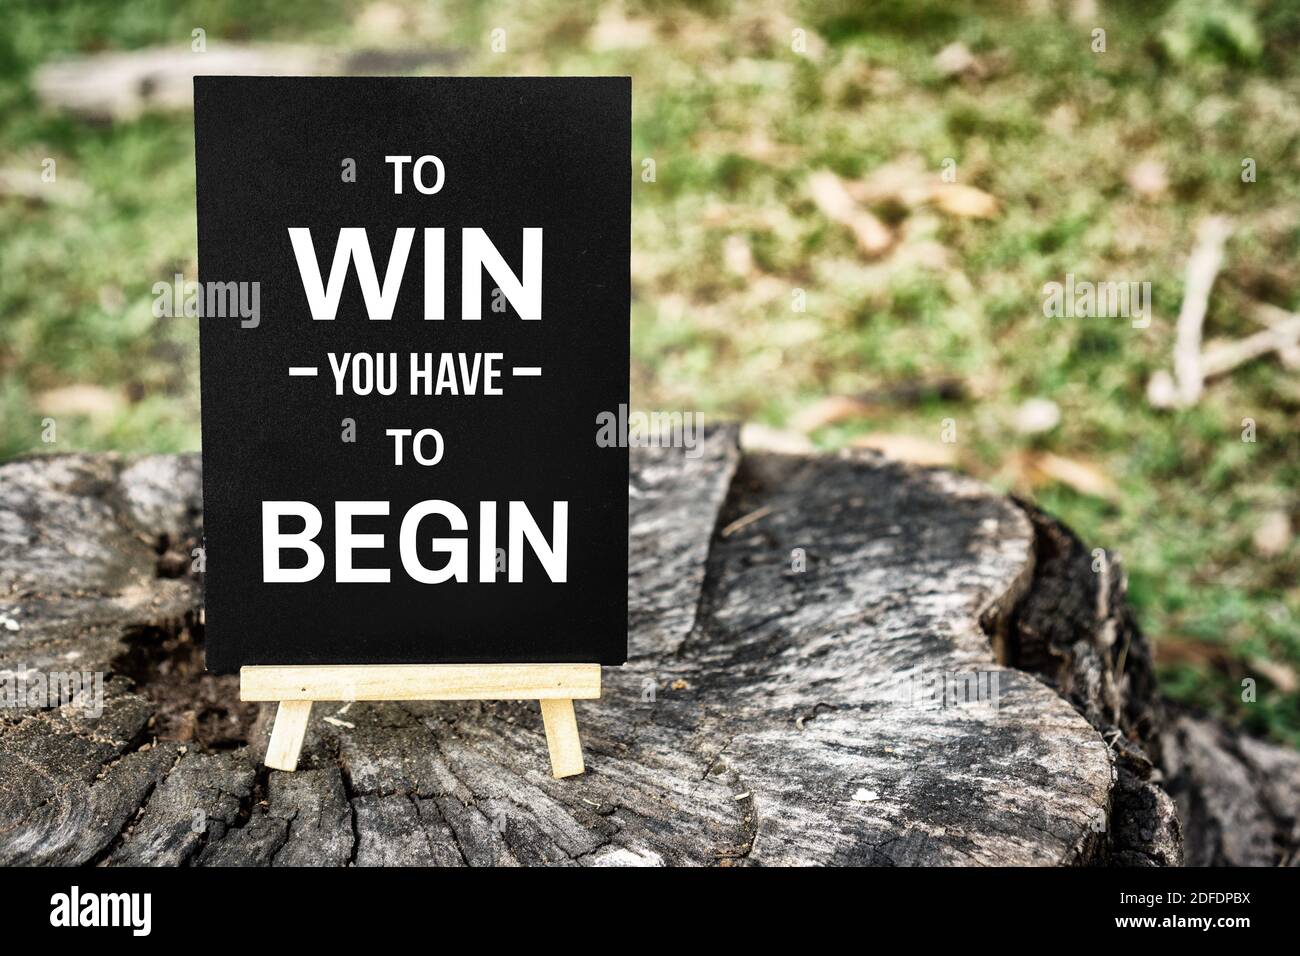 Inspirational and Motivational Quote. To Win You Have To Begin. Mini Blackboard on Wood. Stock Photo